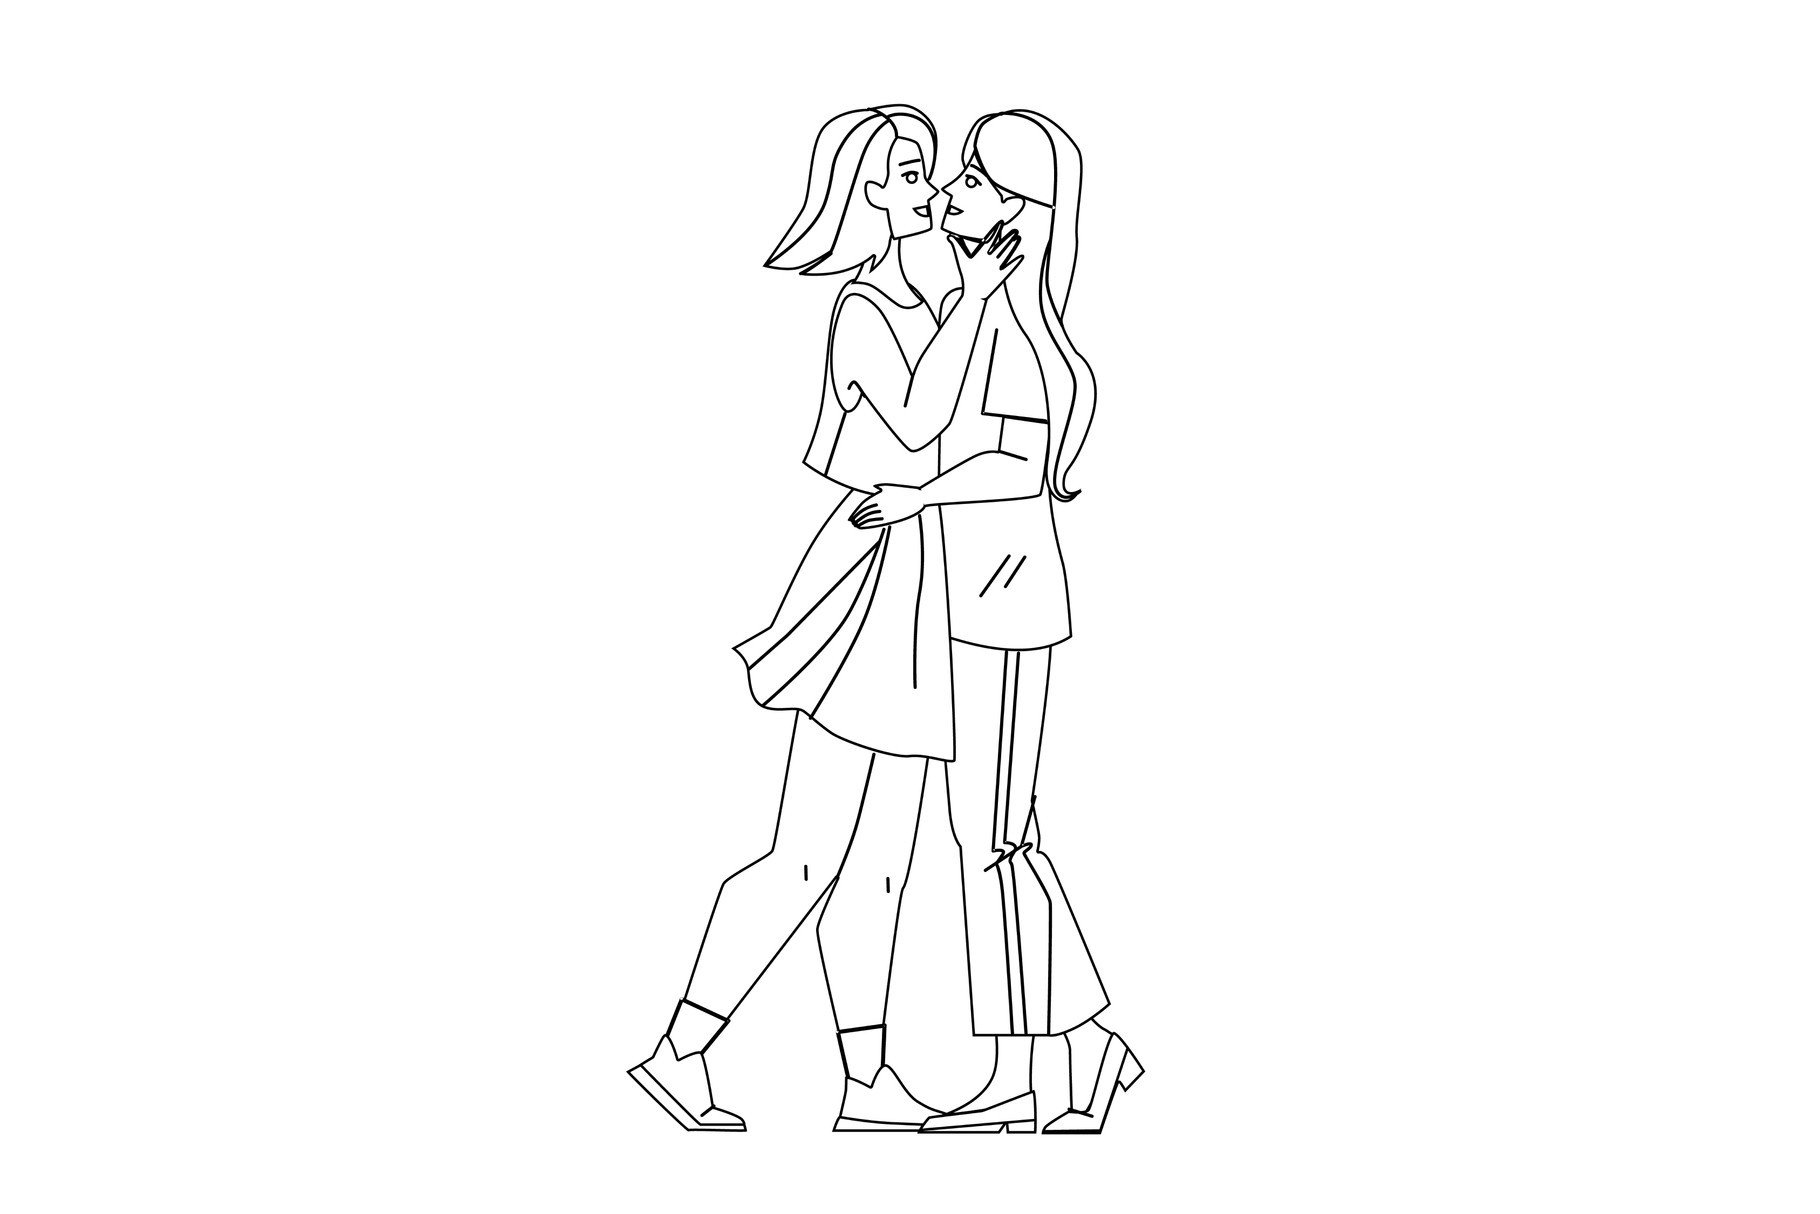 Lesbian Couple Kiss And Embrace Together Graphic By Sevvectors · Creative Fabrica